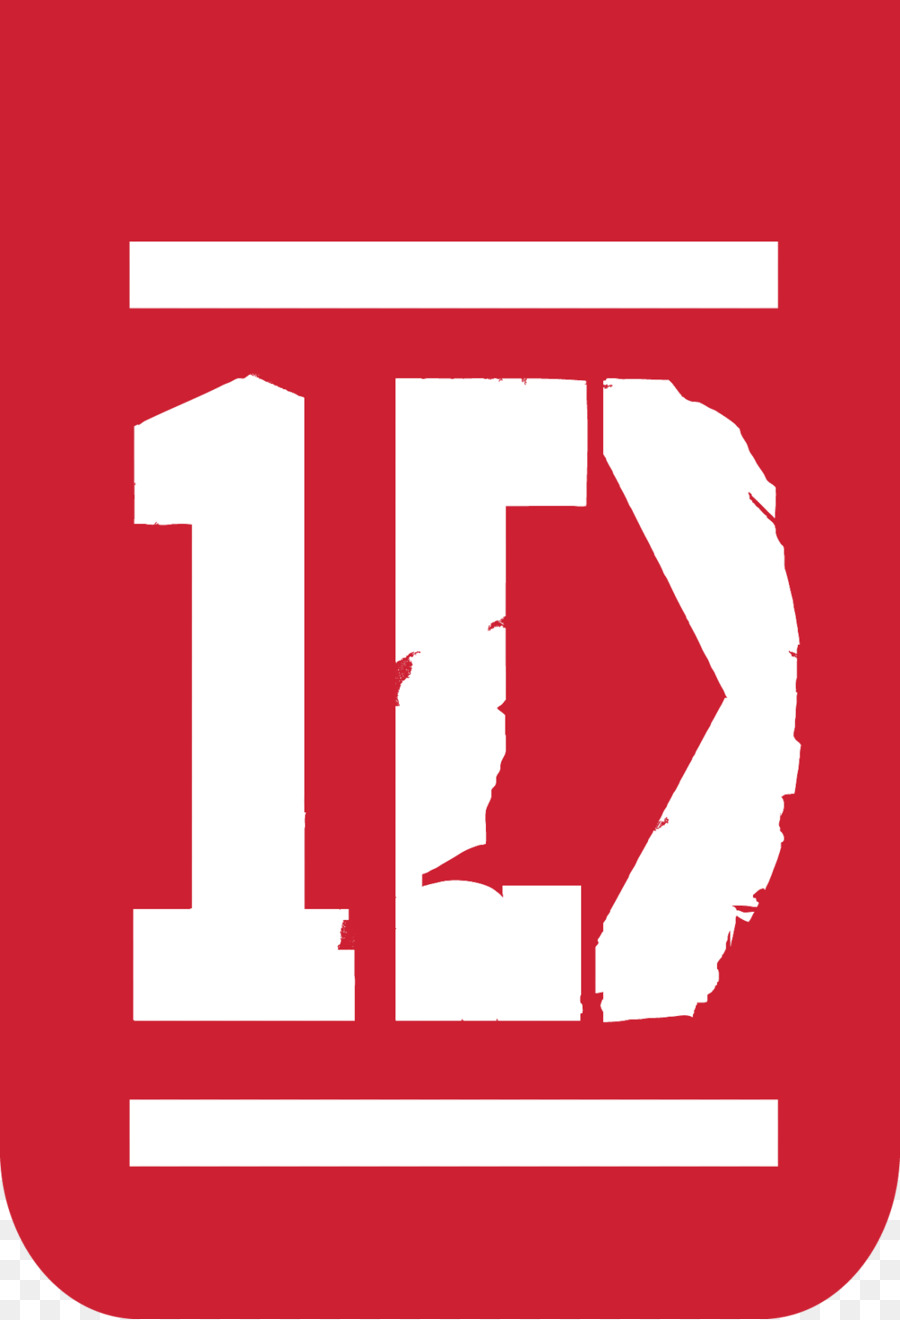 One Direction Logo Musician Clip art - One Direction Cliparts png download - 1200*1759 - Free Transparent One Direction png Download.